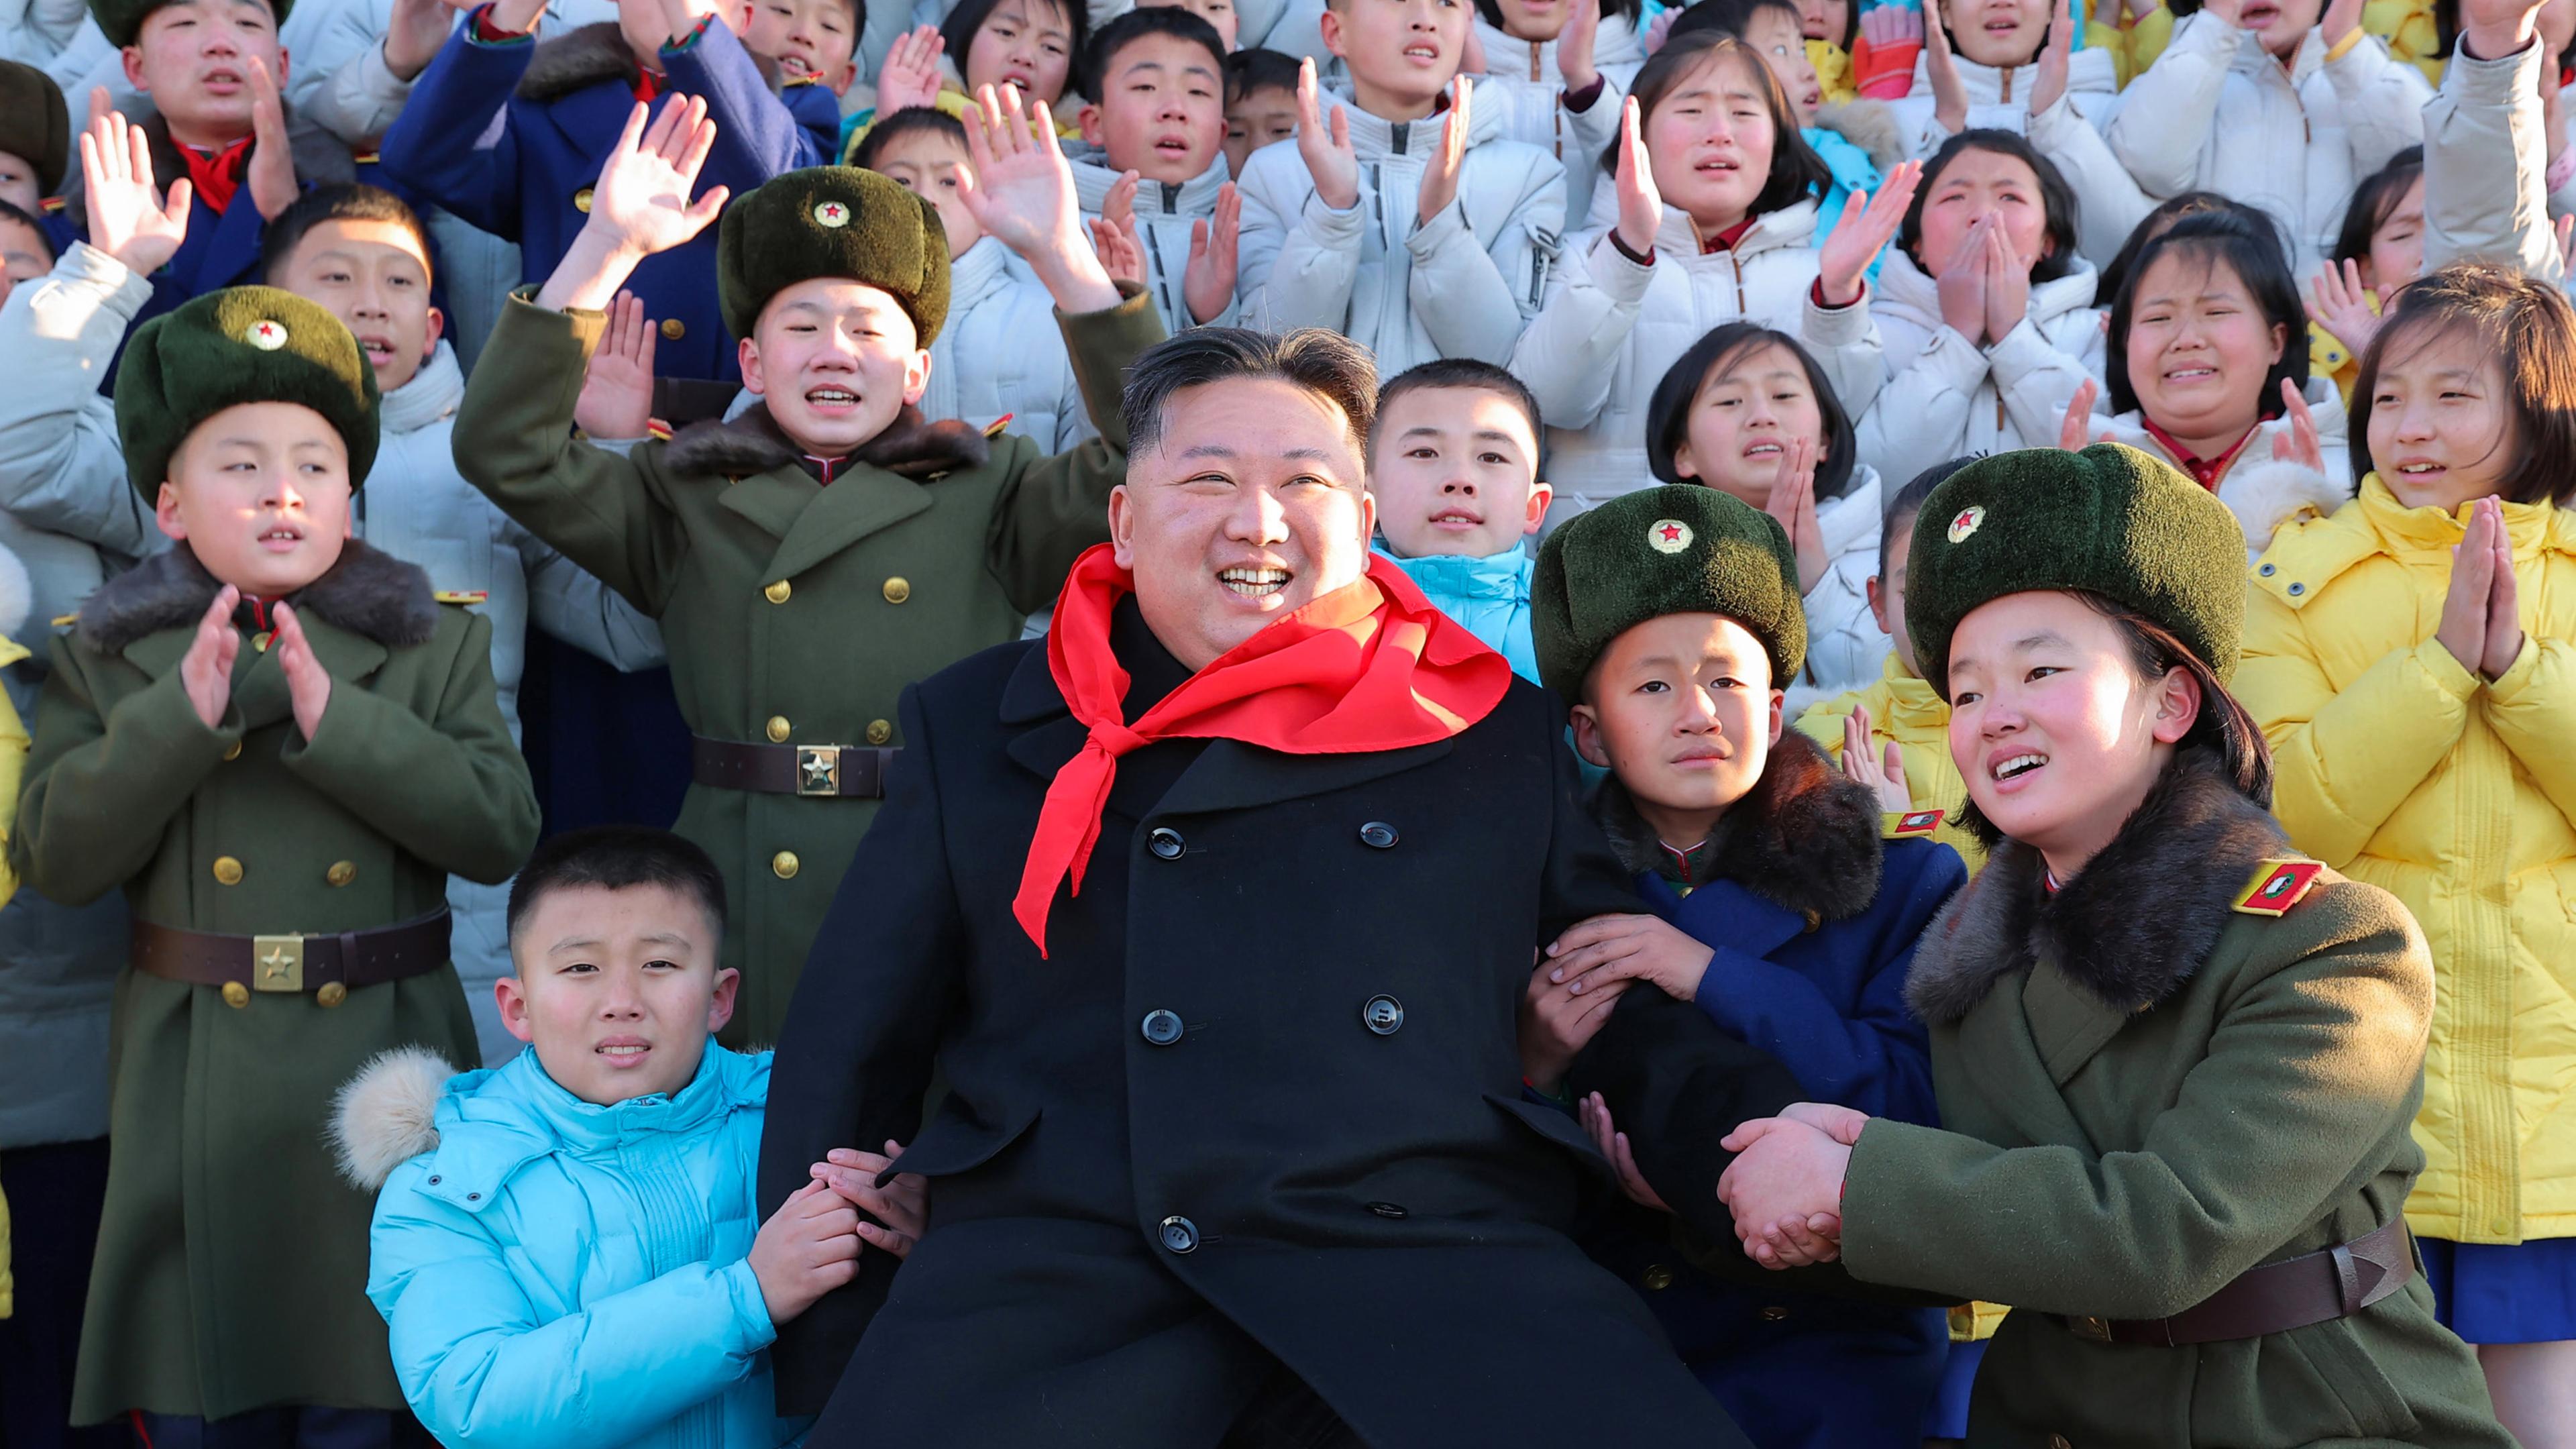 Ruler Kim Jong-un stands close to the public at a crowded event.